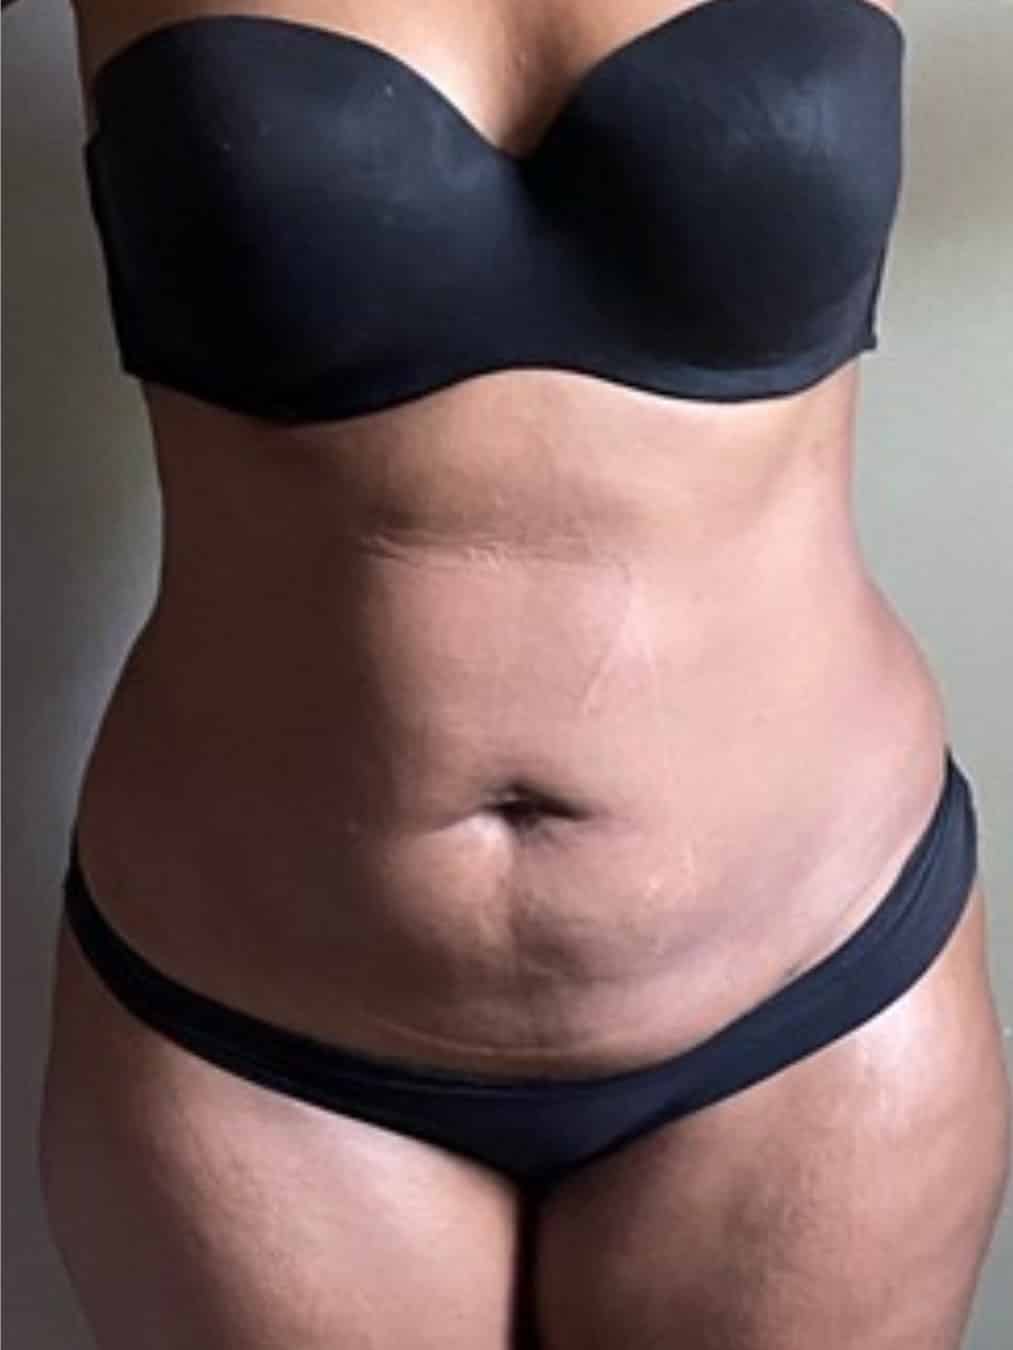 41-year-old-female-3-months-post-op-vaseer-liposuction-of-the-back